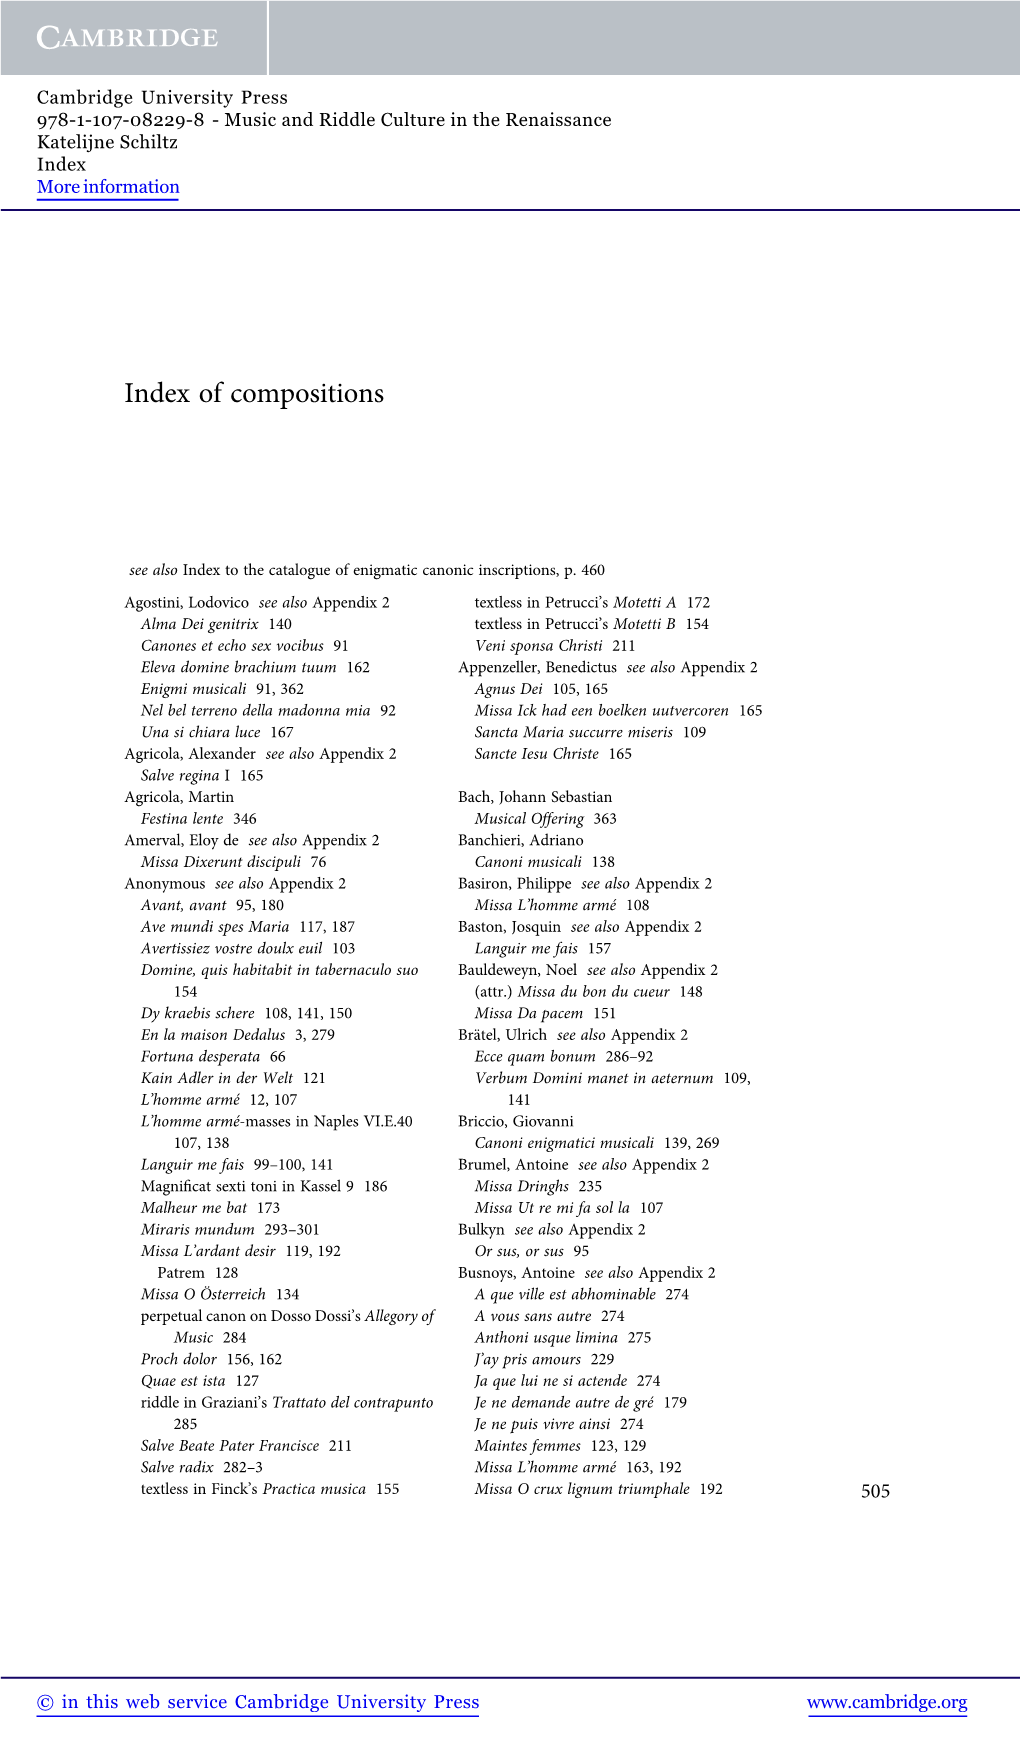 Index of Compositions